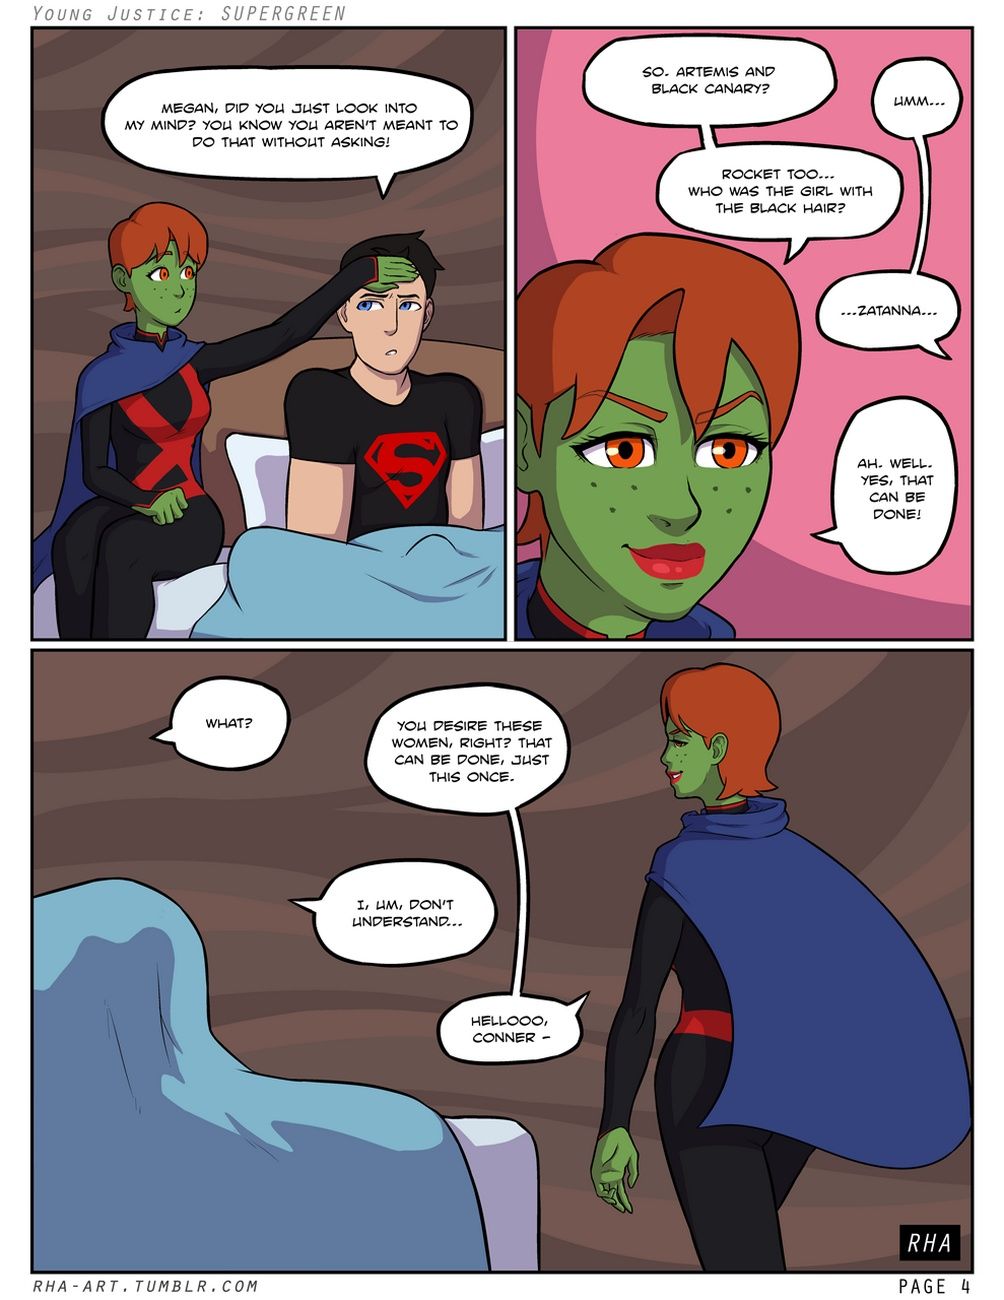 Young Justice - Supergreen page 5